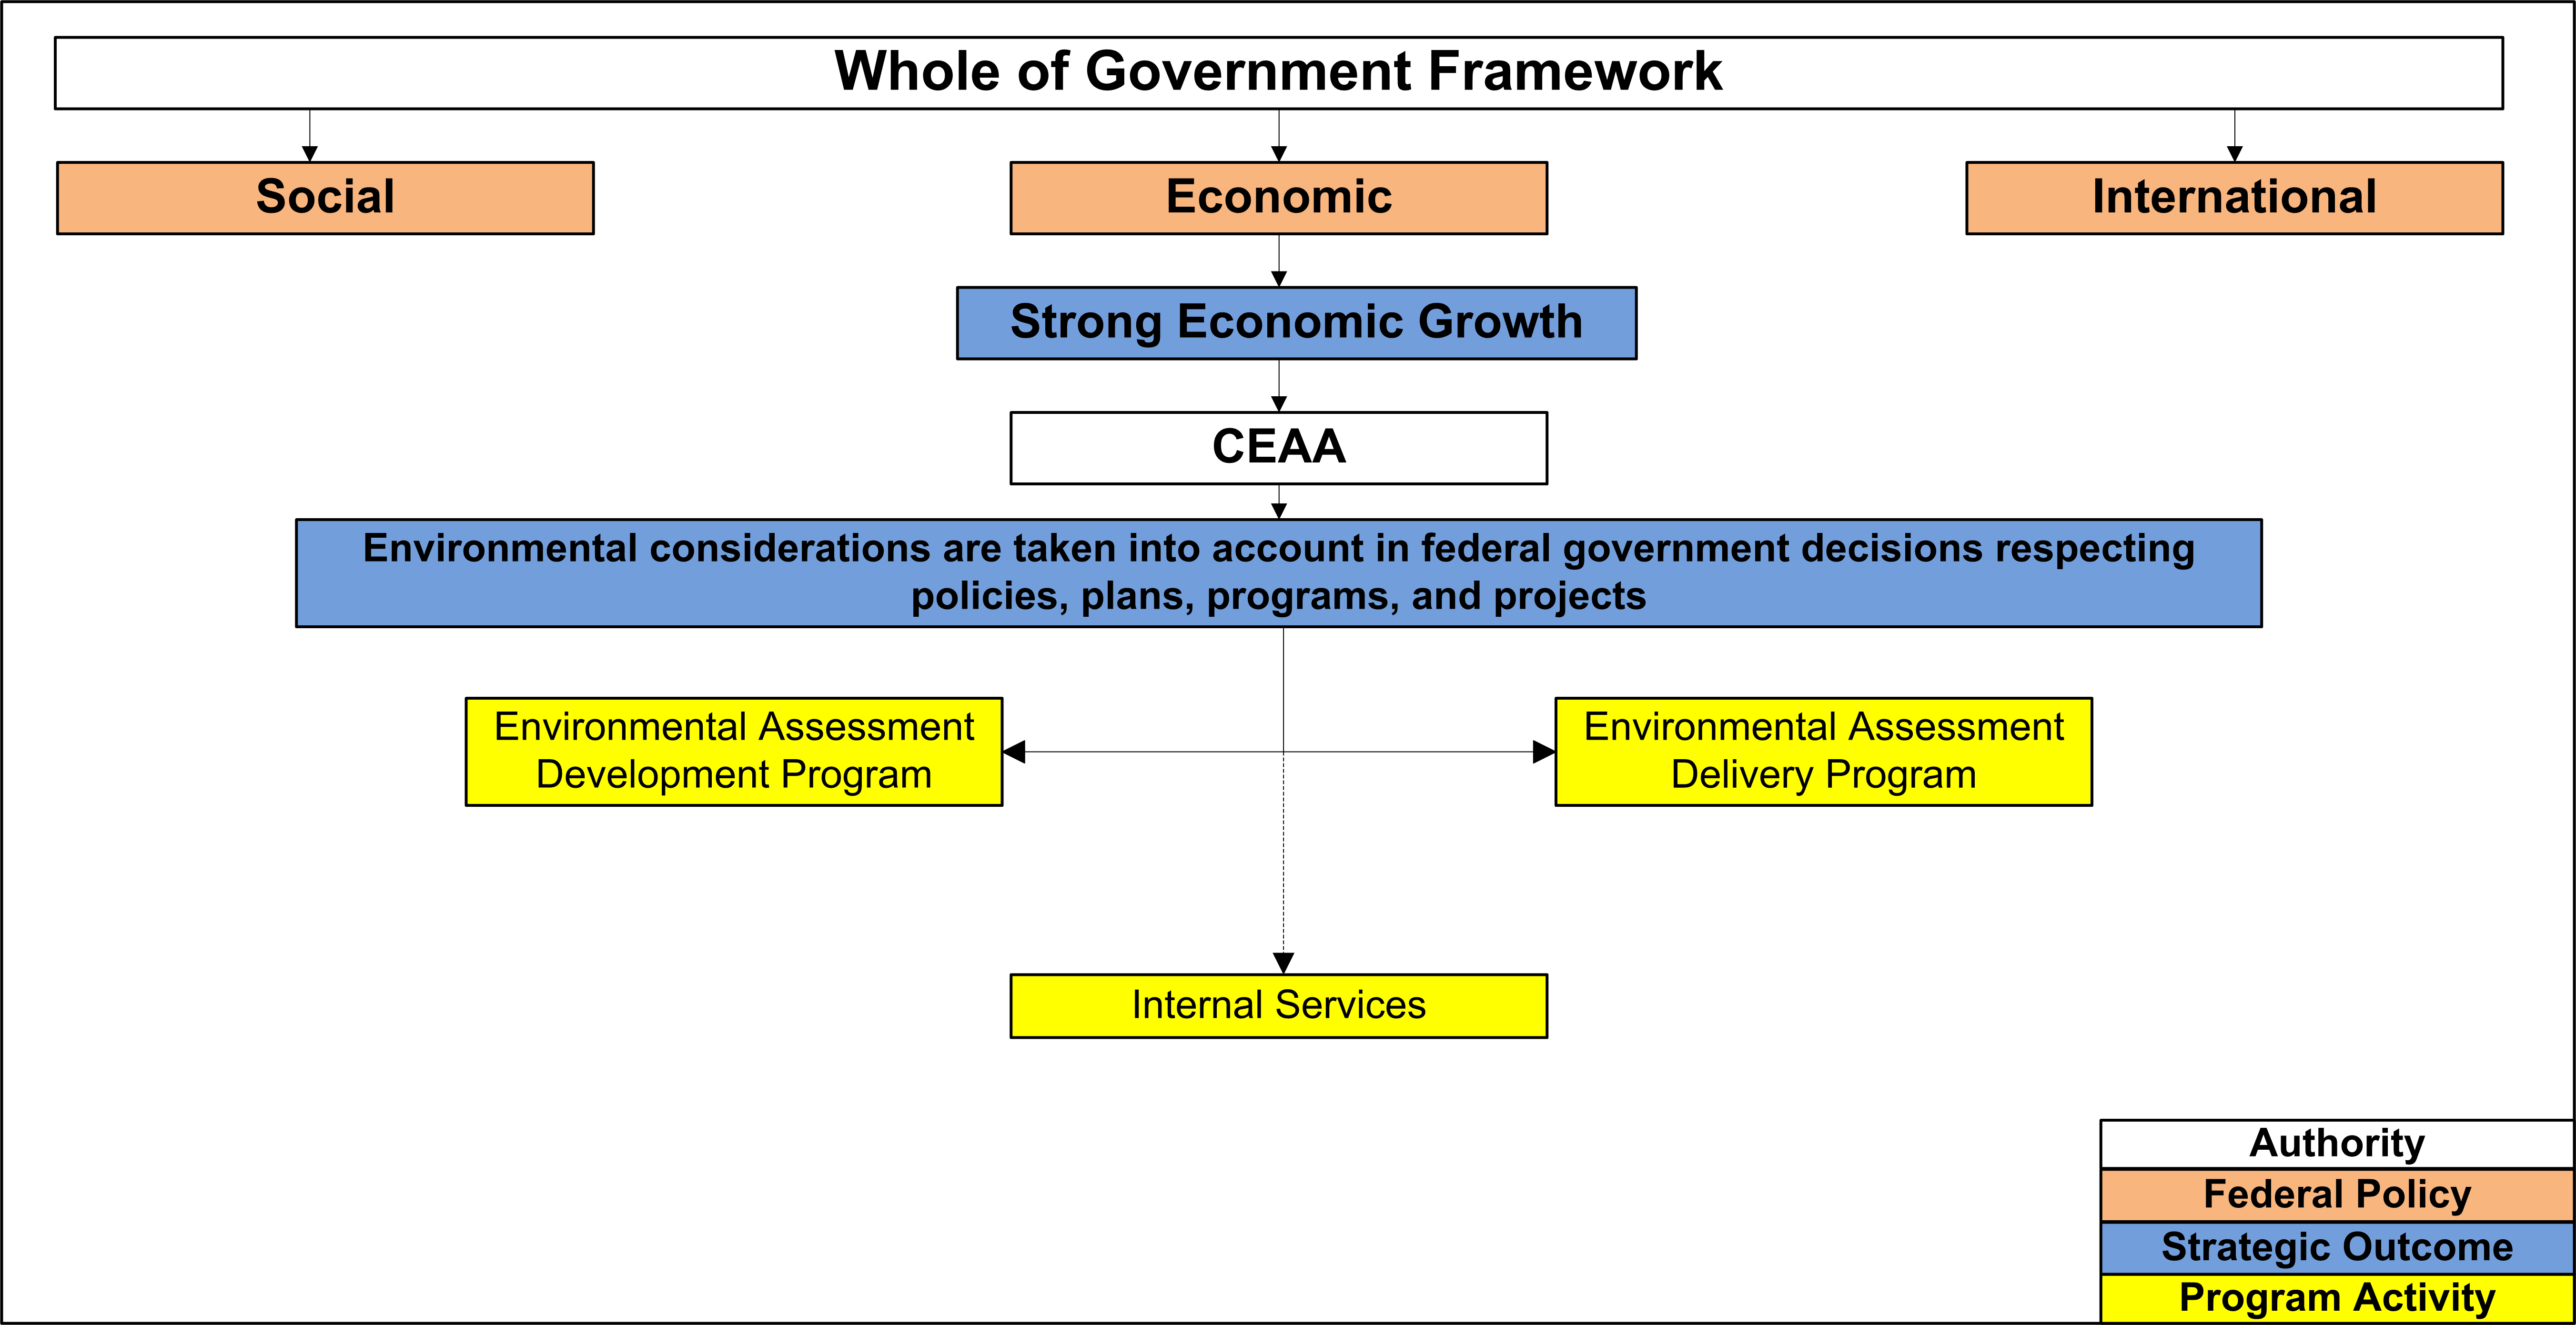 Canadian Environmental Assessment Agency's Program Activity Architecture